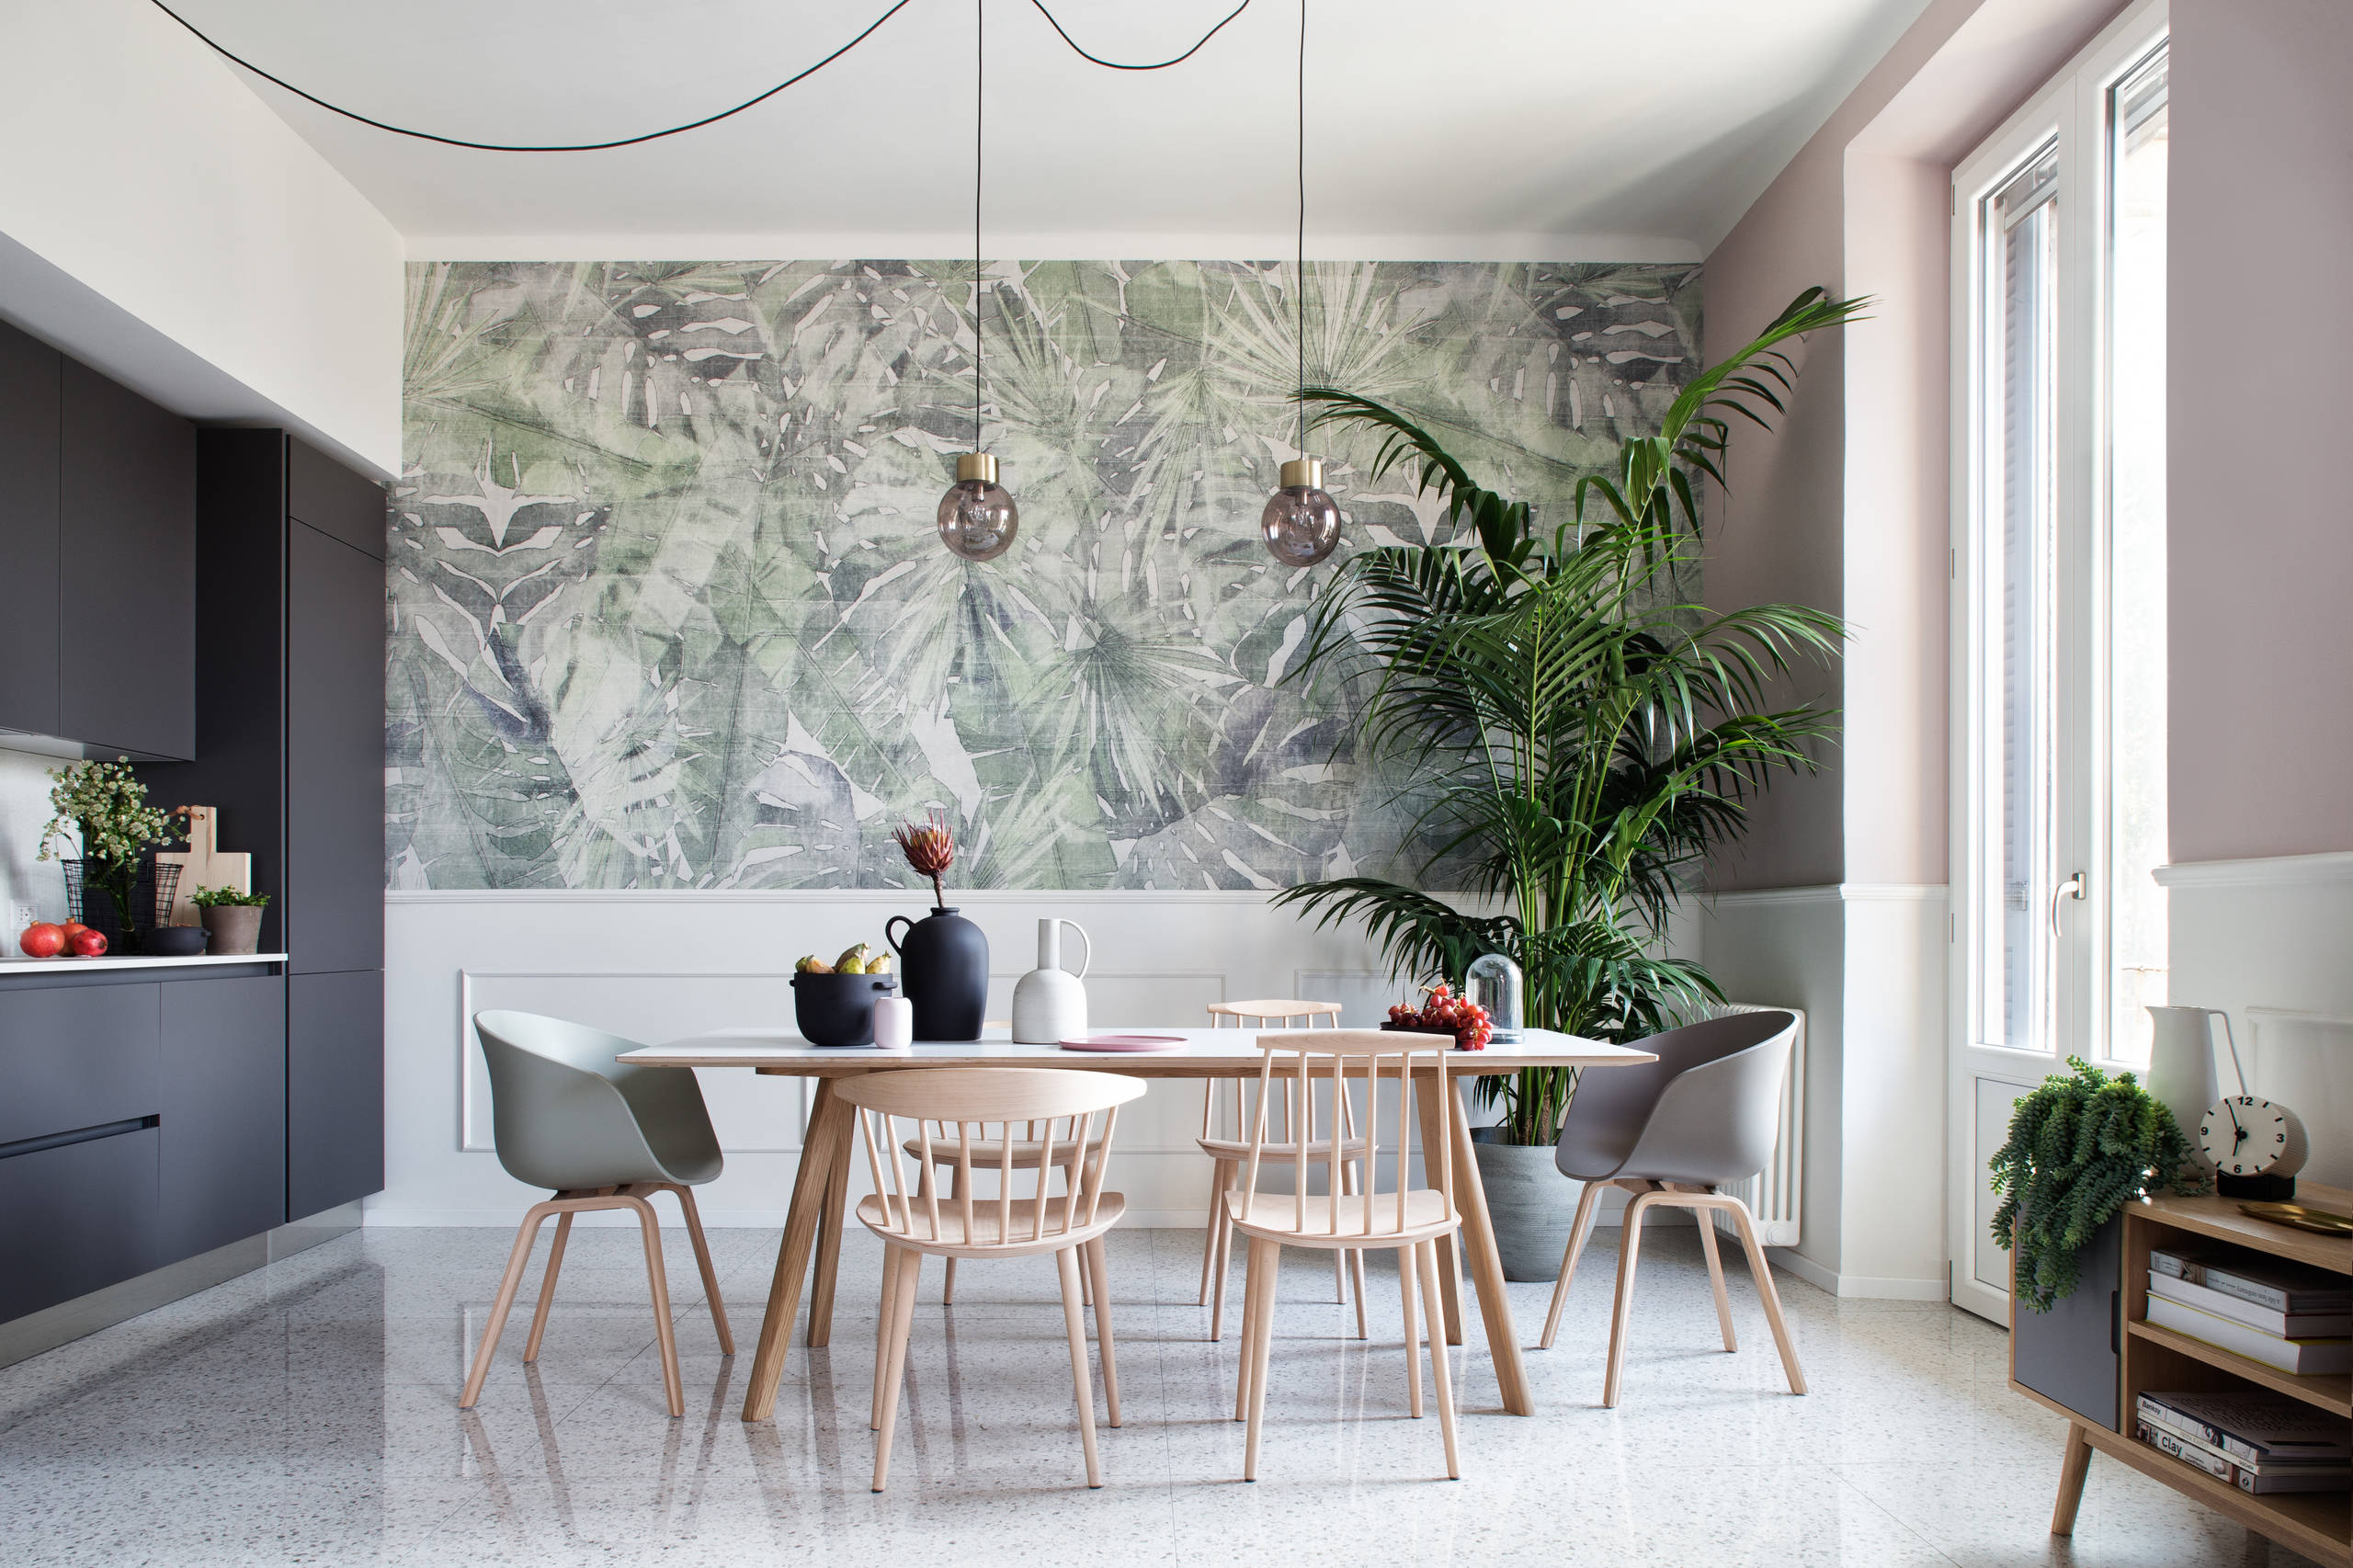 75 Dining Room with Pink Walls Ideas You'll Love - October, 2022 | Houzz